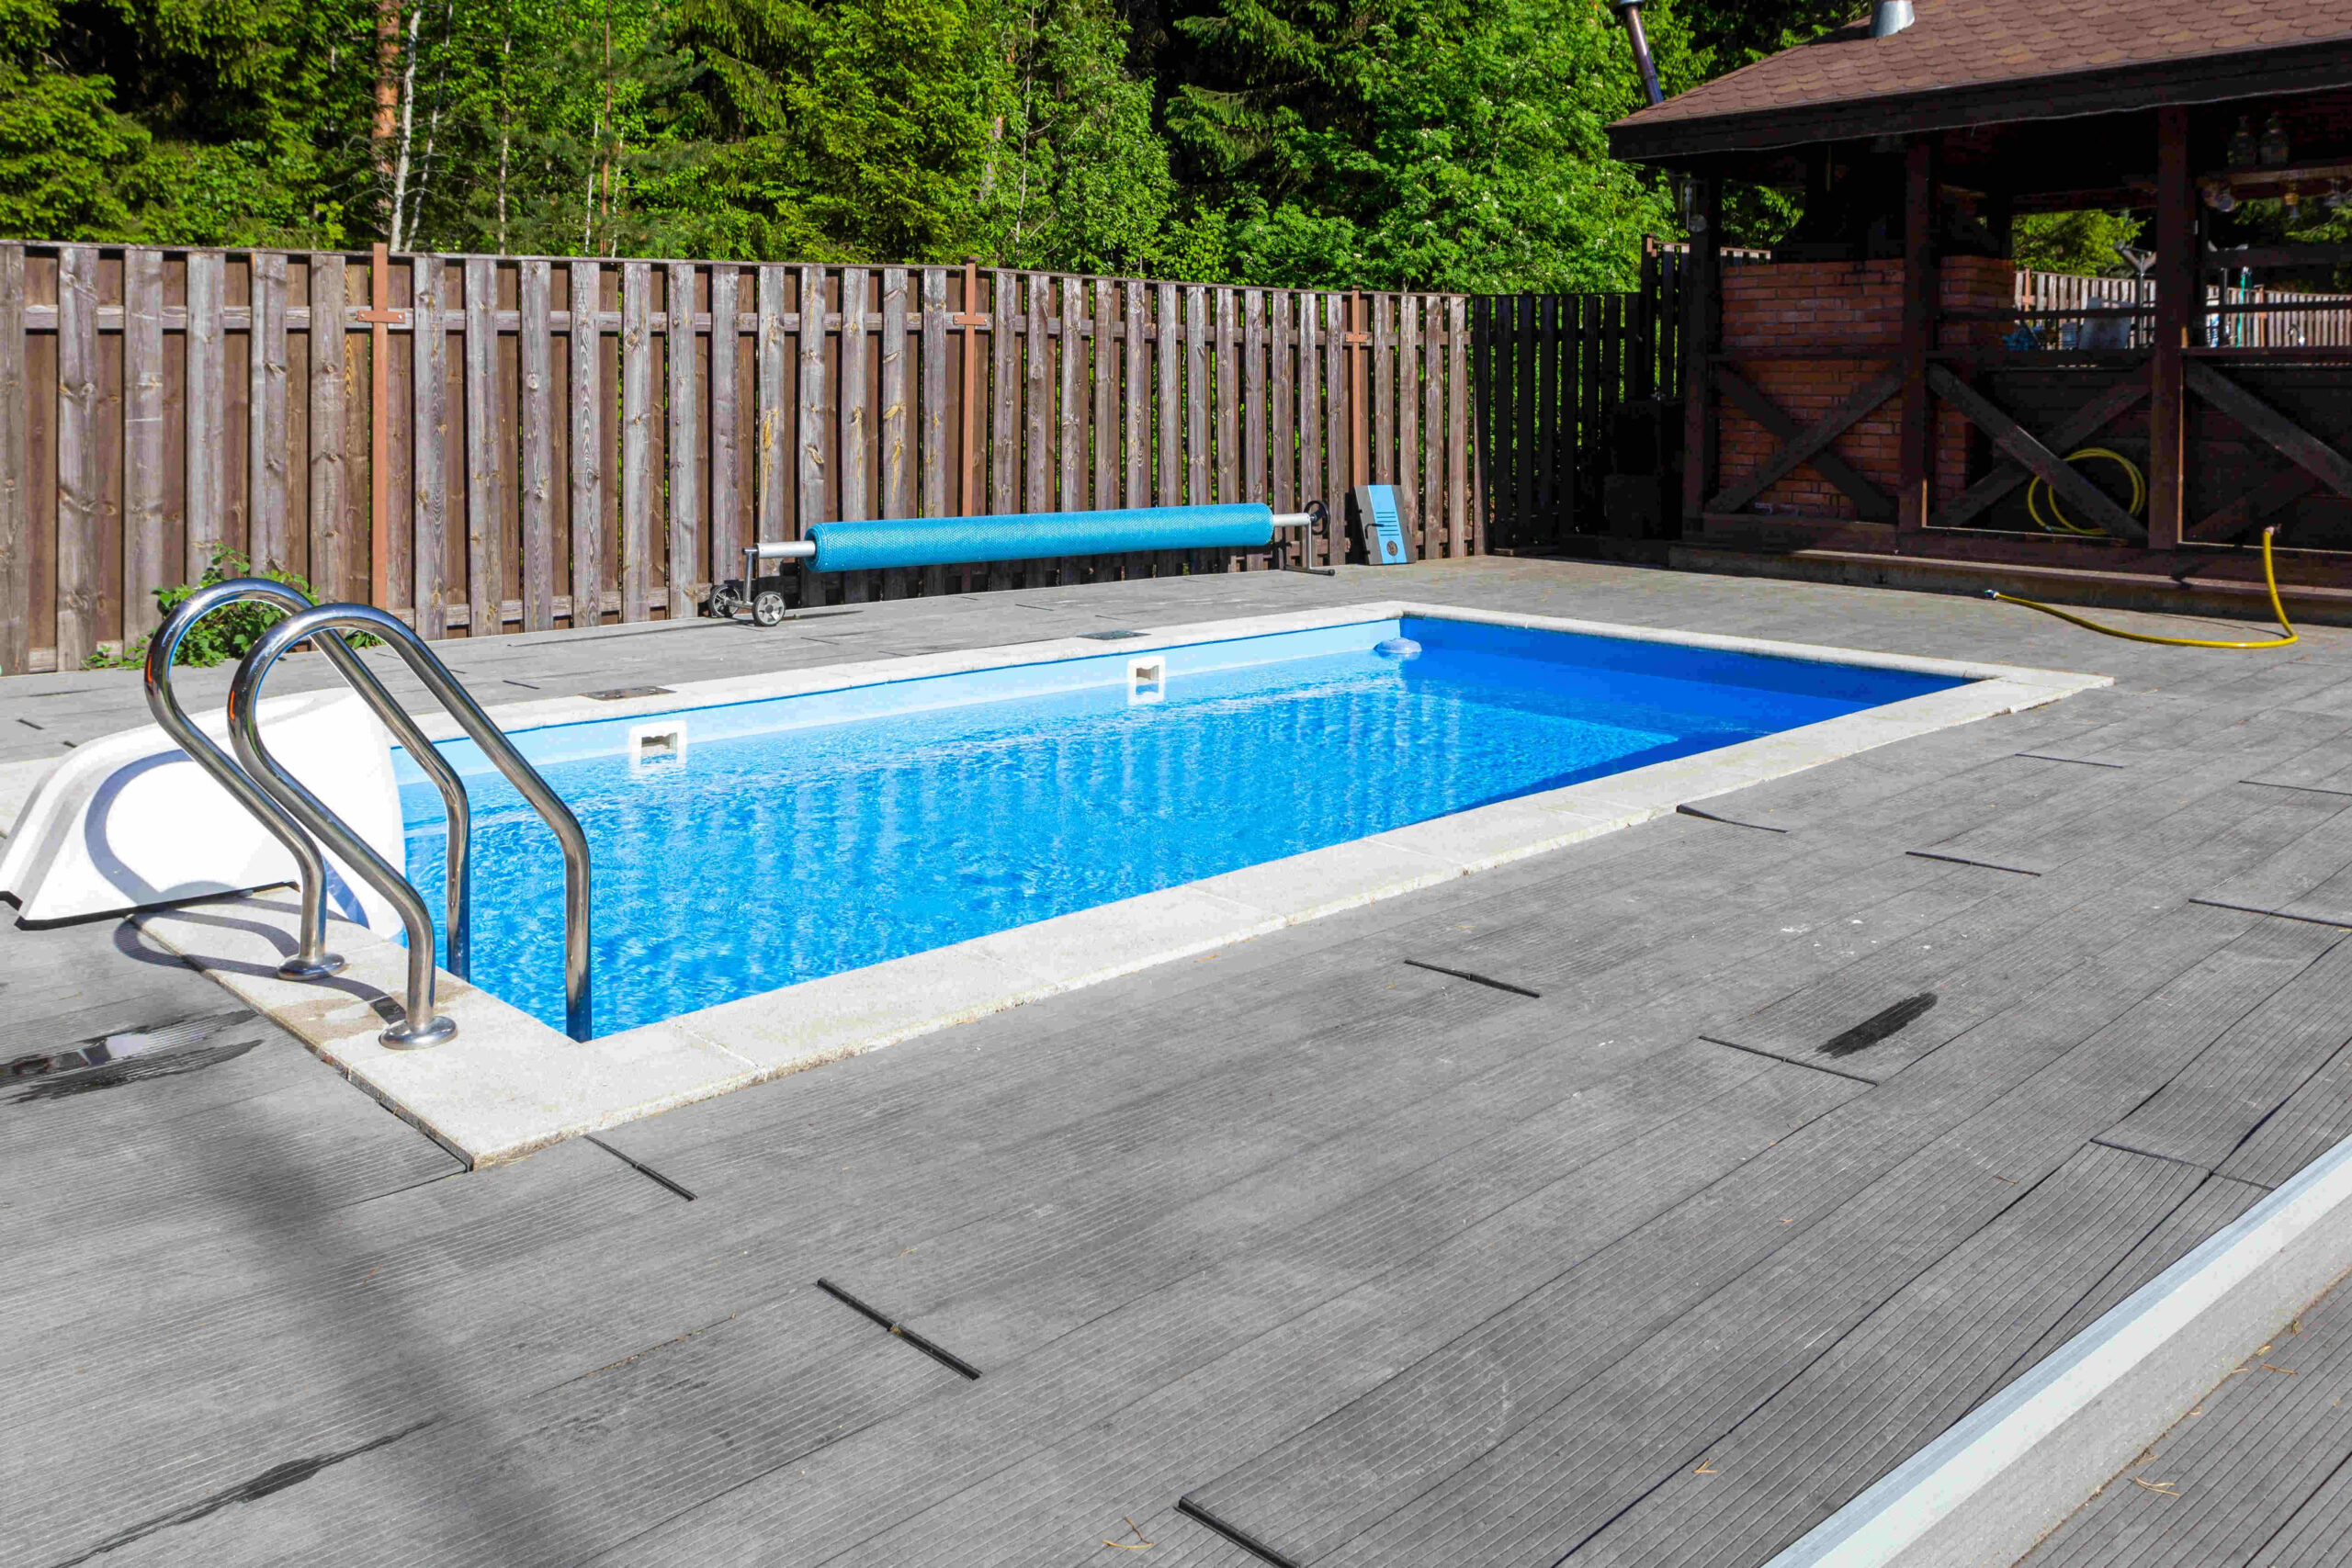 An Inground Pool In A Small Backyard, Can You Put An Inground Pool In A Small Backyard